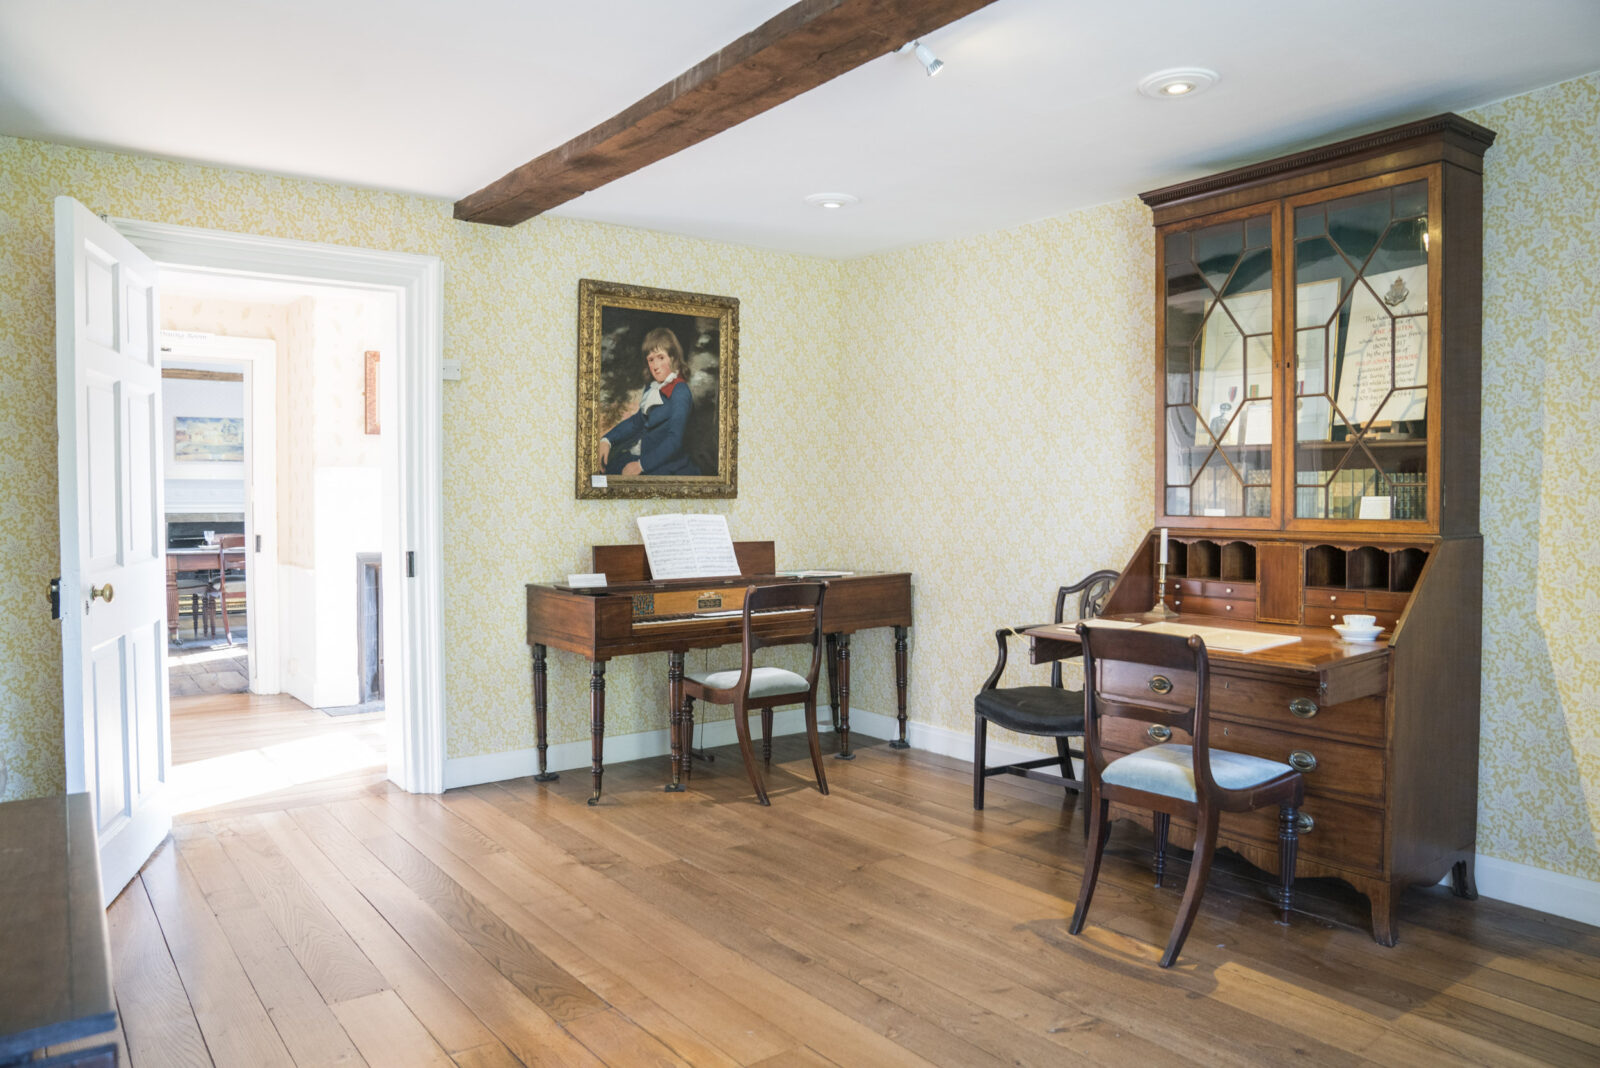 The Drawing Room at Jane Austen's House. Photo by Rob Stothard